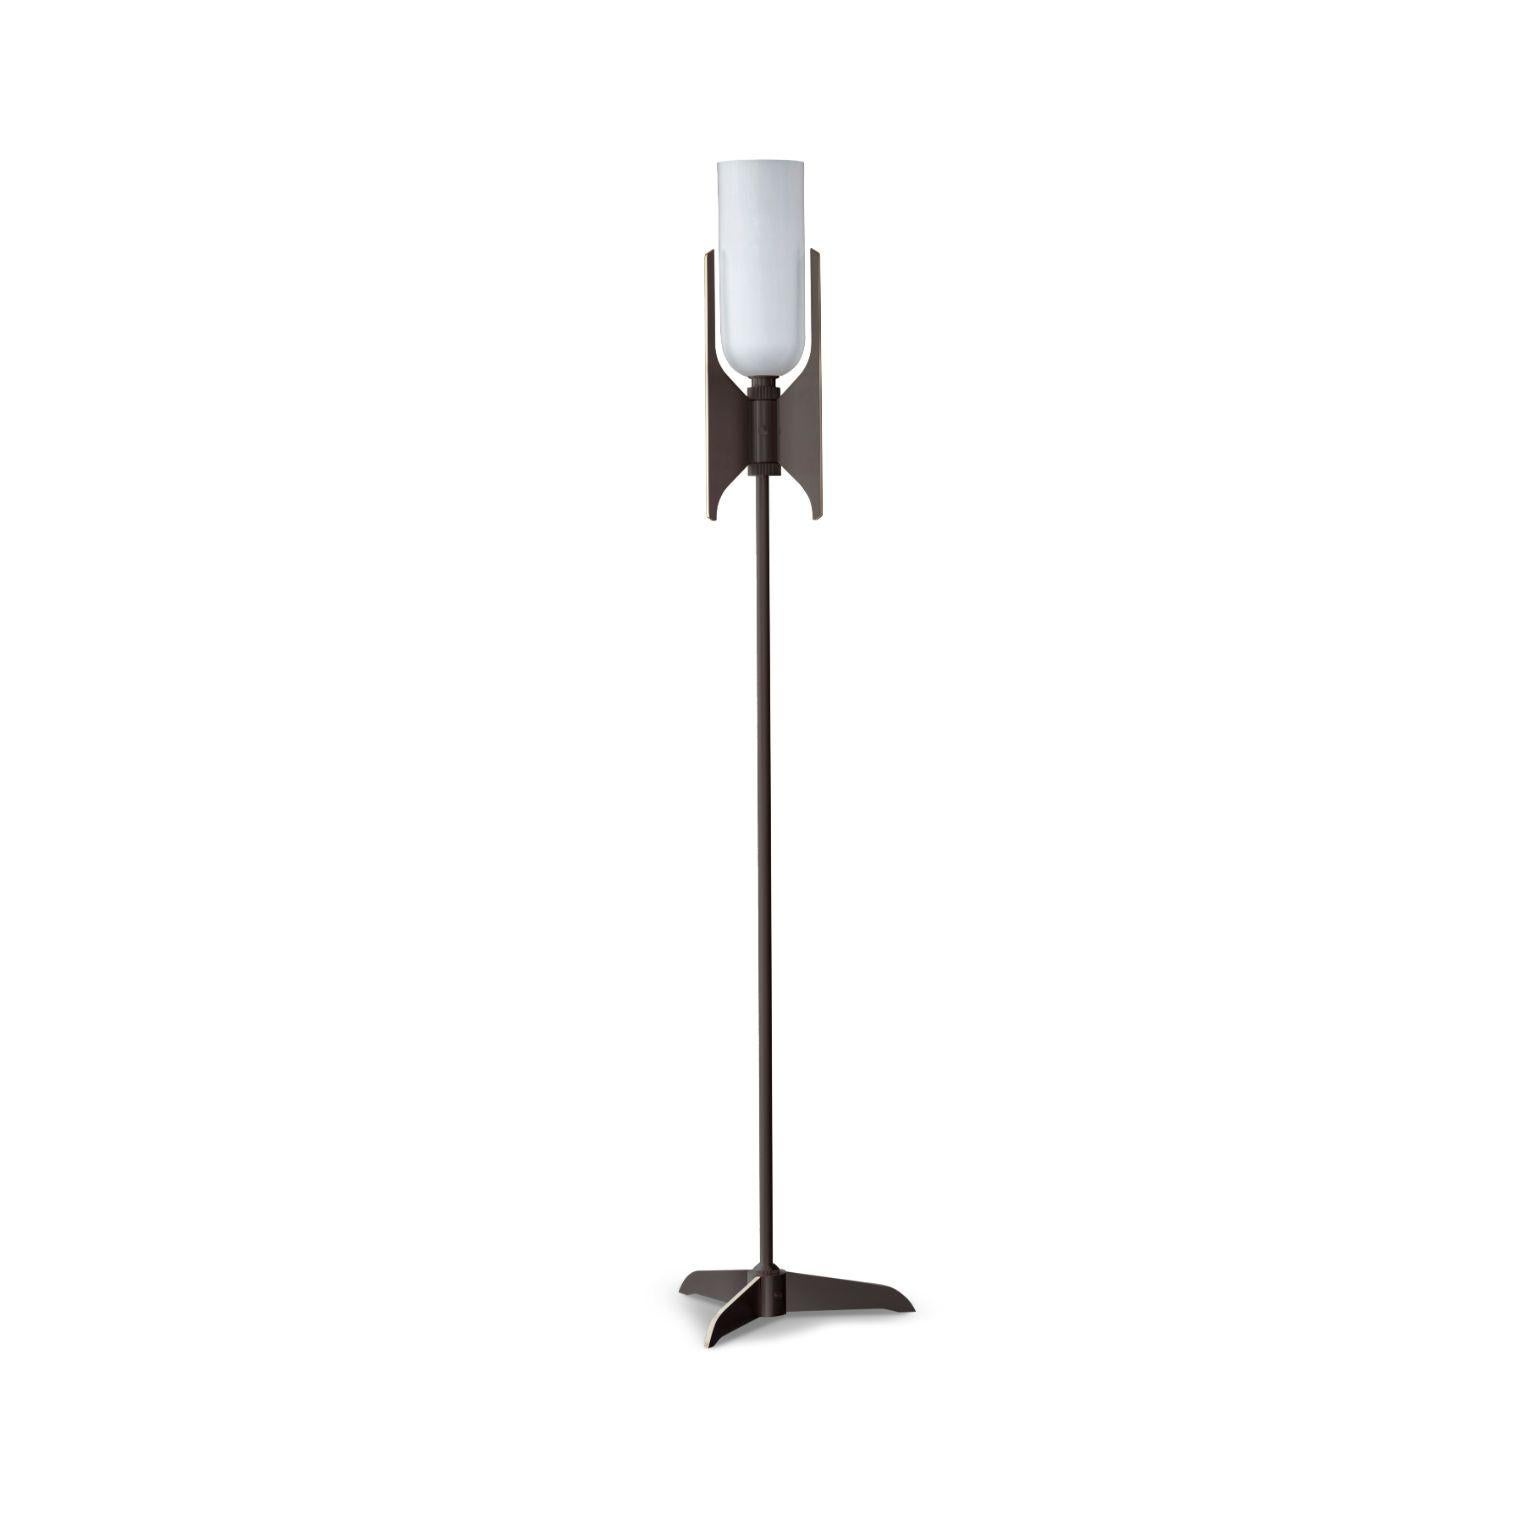 Pennon floor lamp - bronze by Bert Frank
Dimensions: 140.5 x 37.9 x 13.9 cm
Materials: Bronze, bone China

When Adam Yeats and Robbie Llewellyn founded Bert Frank in 2013 it was a meeting of minds and the start of a collaborative creative